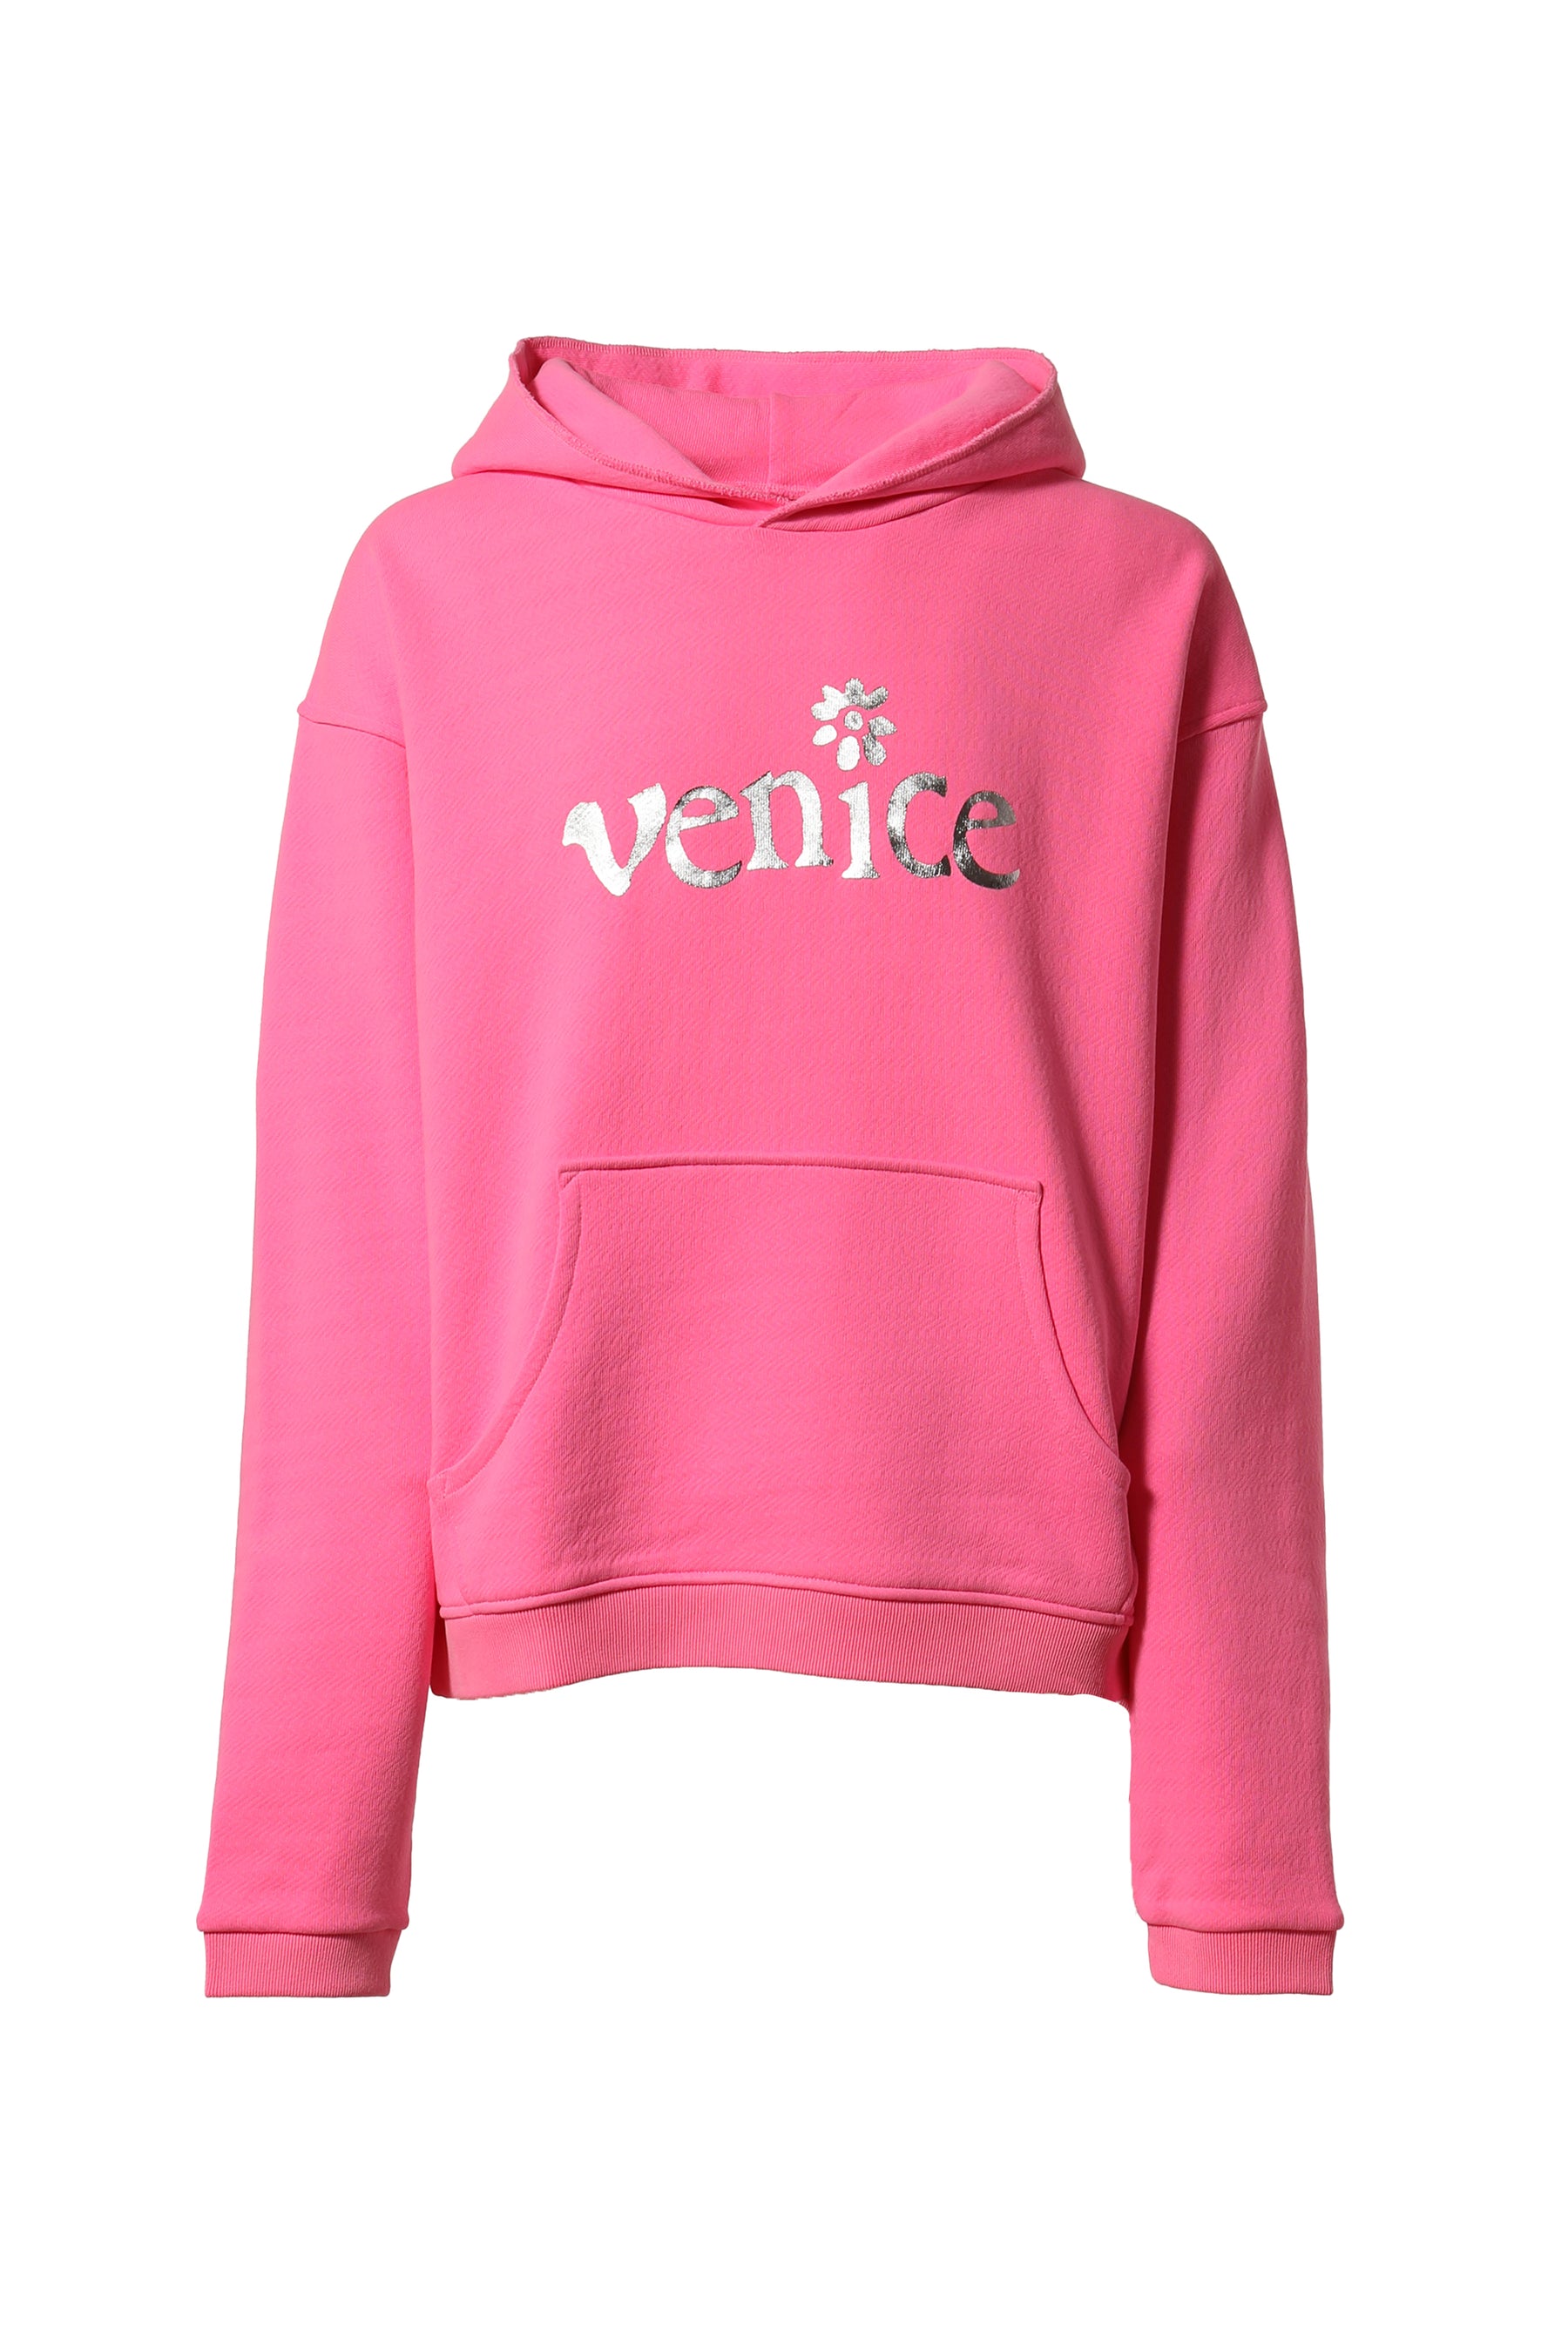 ERL erl  VENICE HOODIE KNIT パーカー